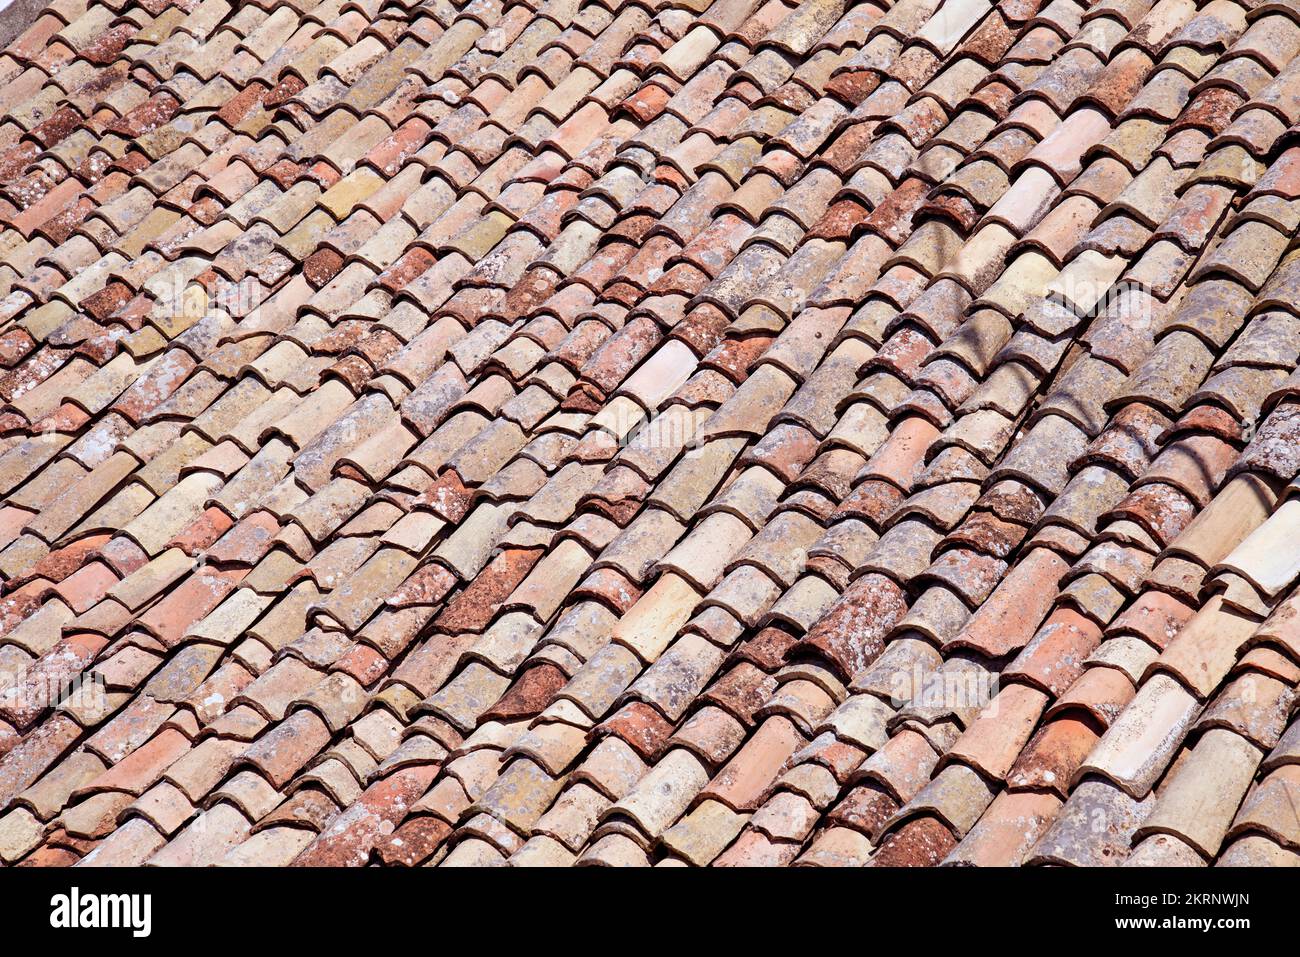 old tile terracotta roof, Italy Stock Photo